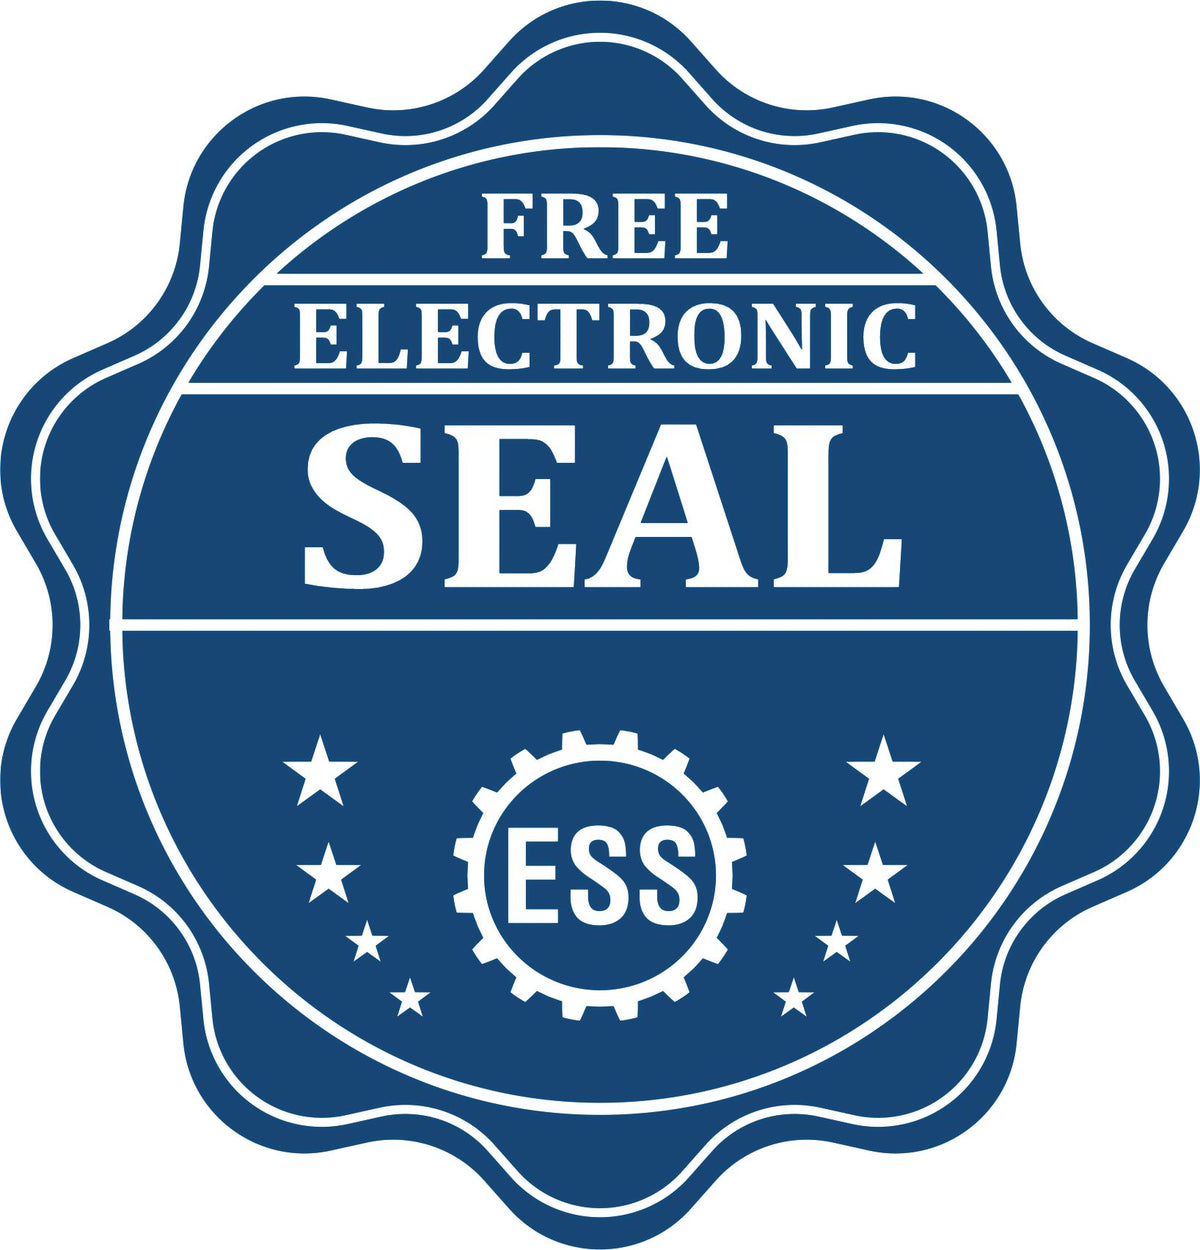 A badge showing a free electronic seal for the Gift Oklahoma Architect Seal with stars and the ESS gear on the emblem.